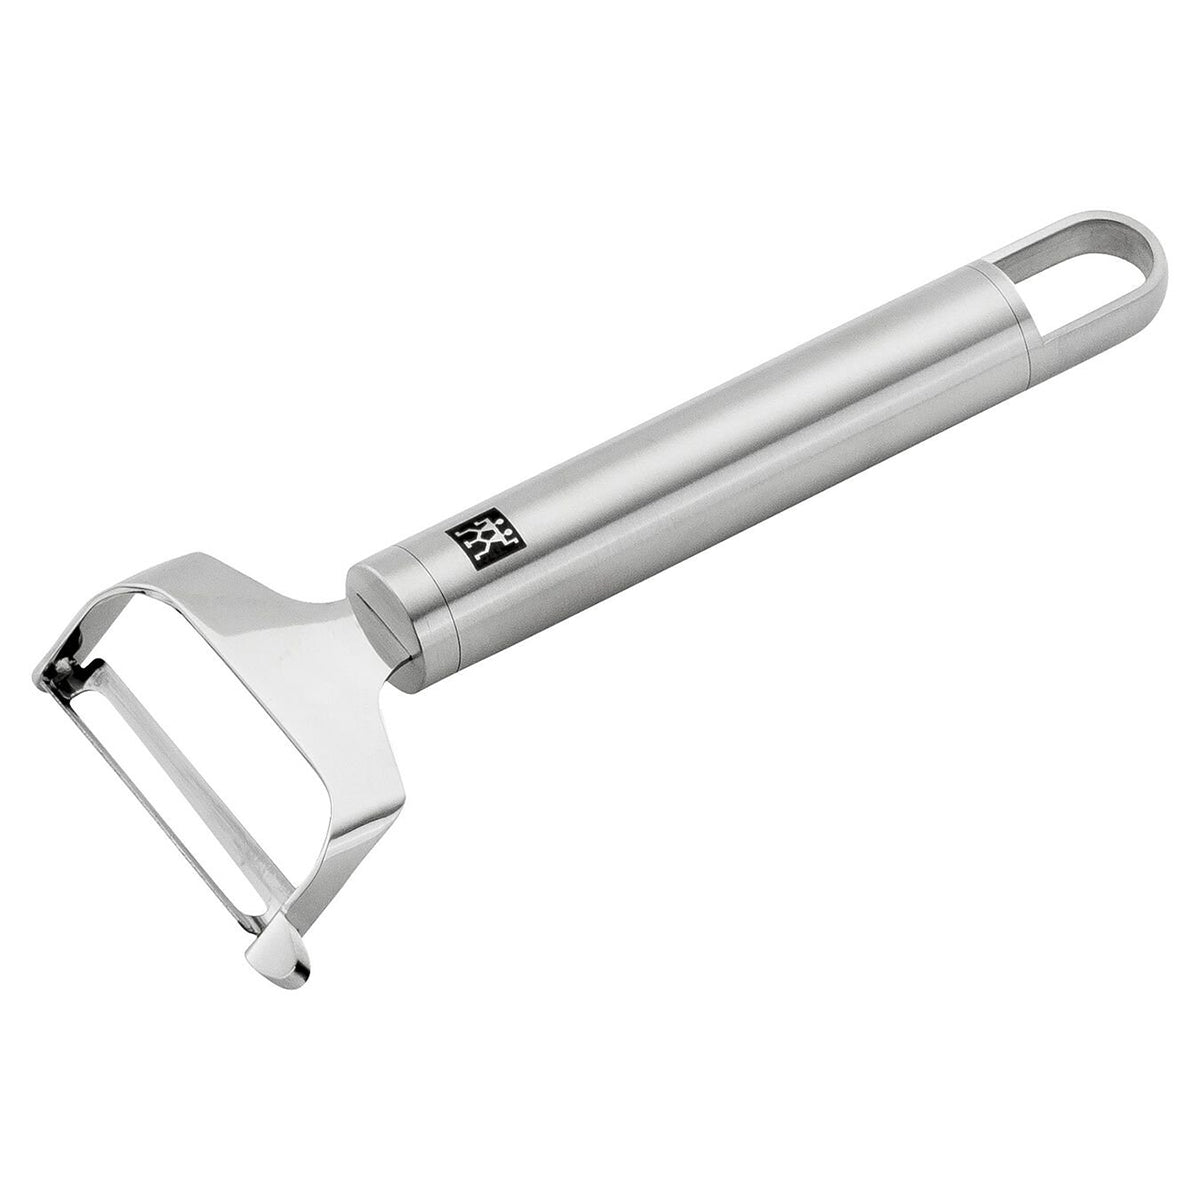 Vegetable Peeler ALL-IN-1 KITCHEN TOOL, SHARP DOUBLE BLADE from